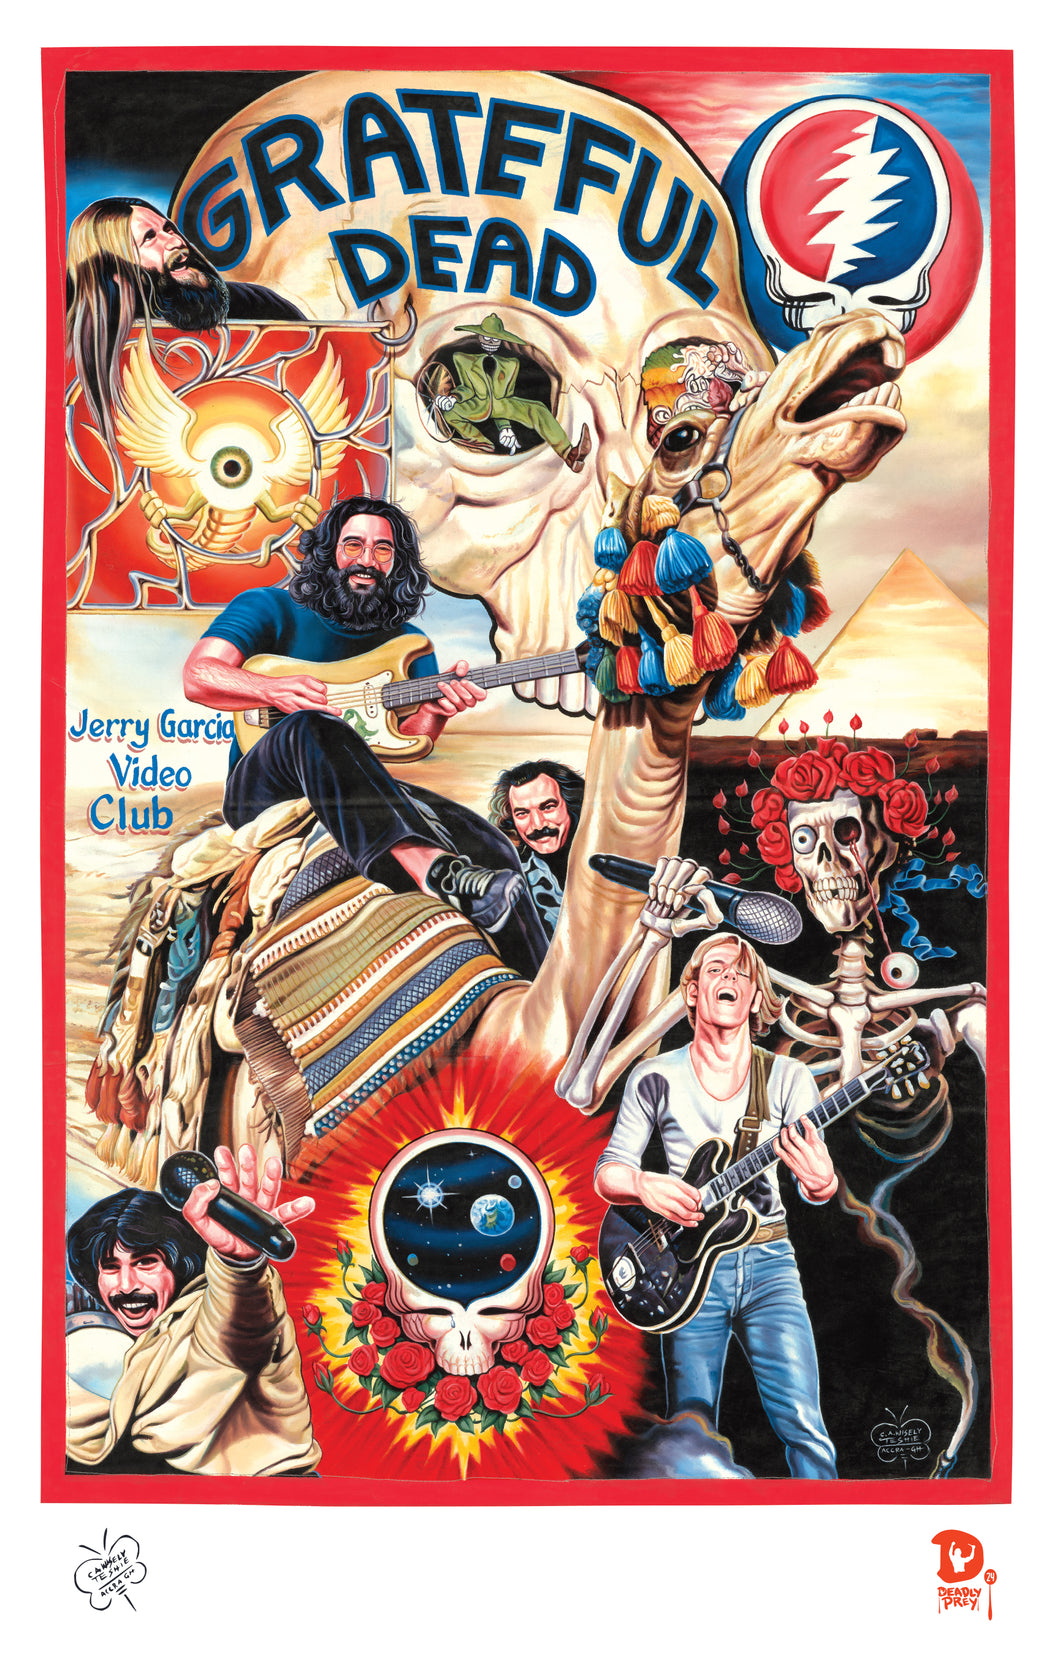 THE GRATEFUL DEAD (High Quality Print) - C.A. Wisely